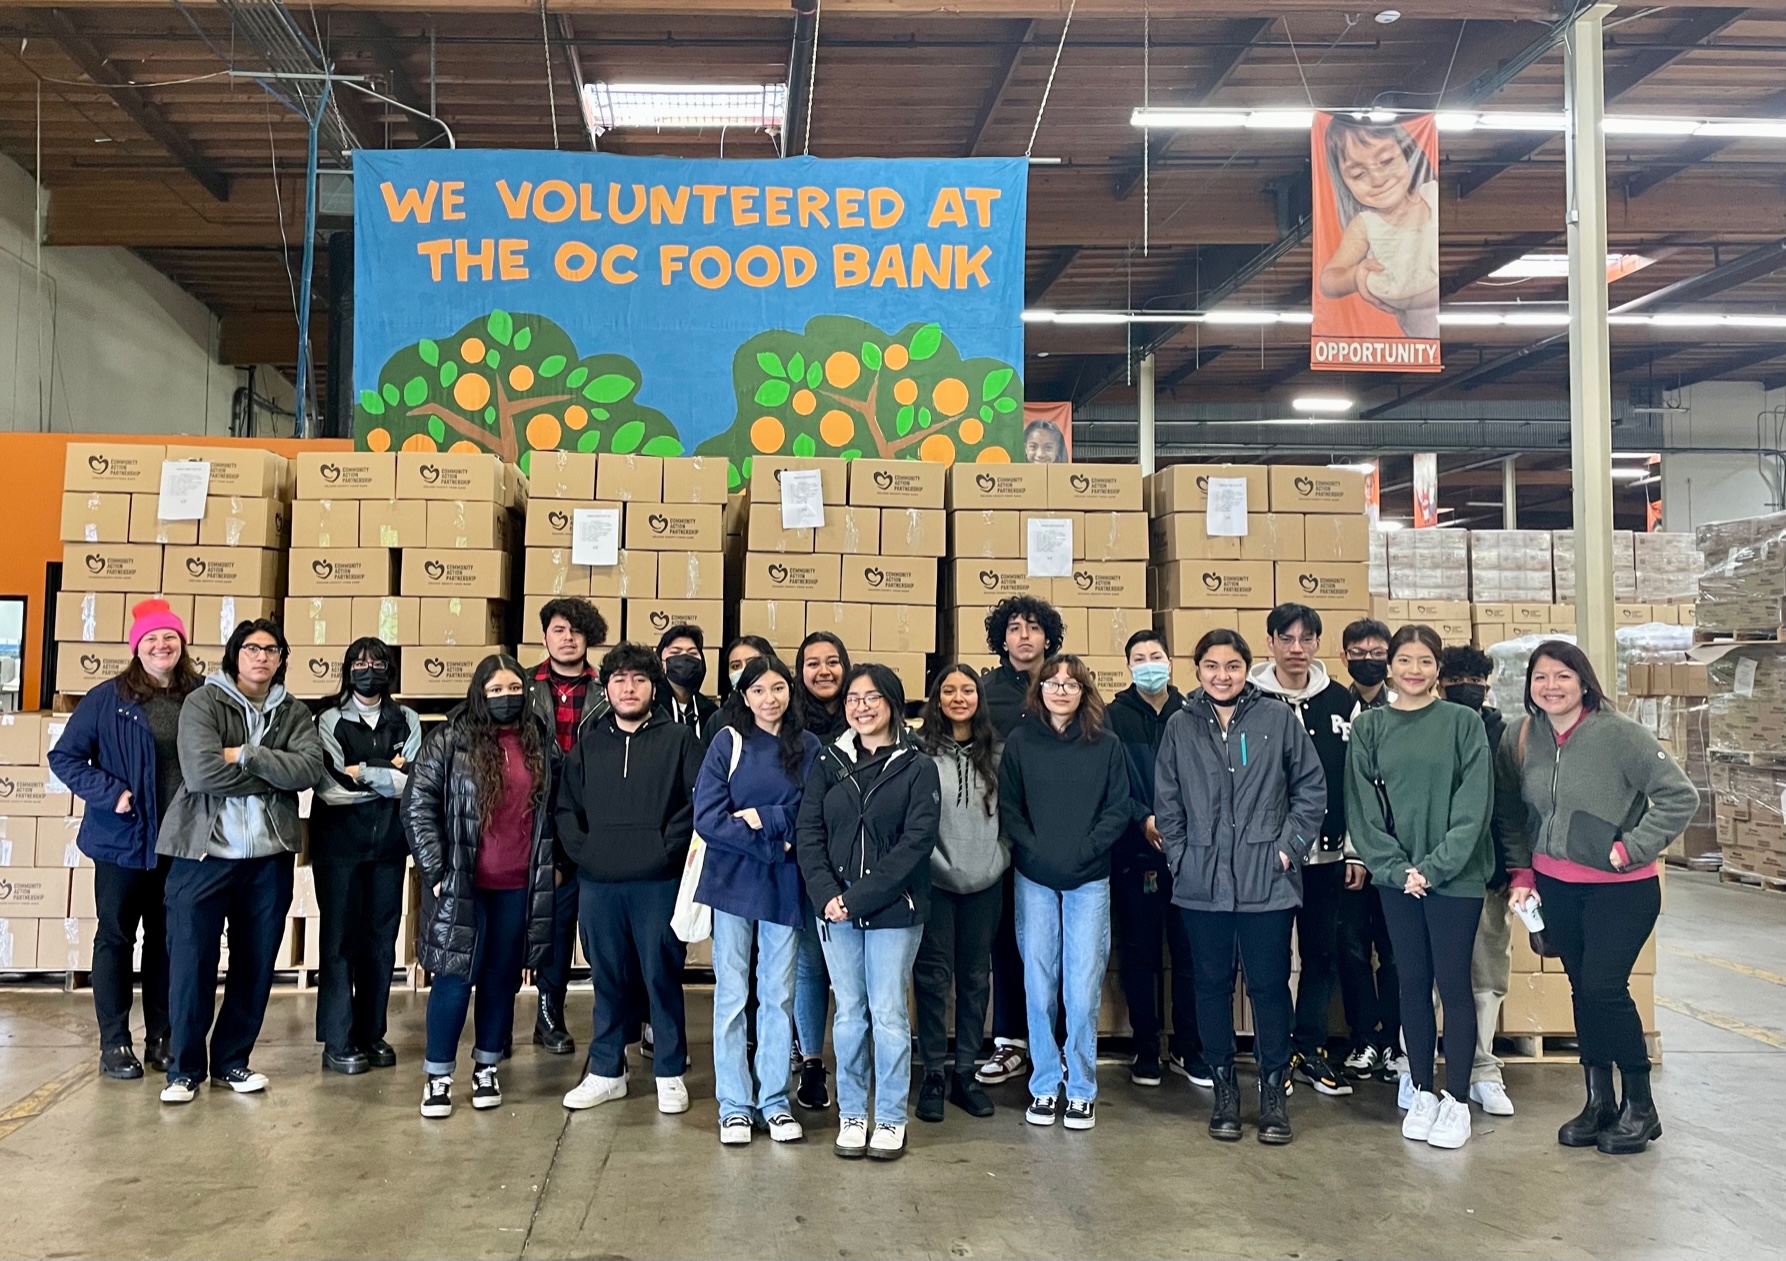 SAC ULink students and staff in a OC Food Bank warehouse posing in front of boxed food boxes and a sign that says "we volunteered at the OC Food Bank."